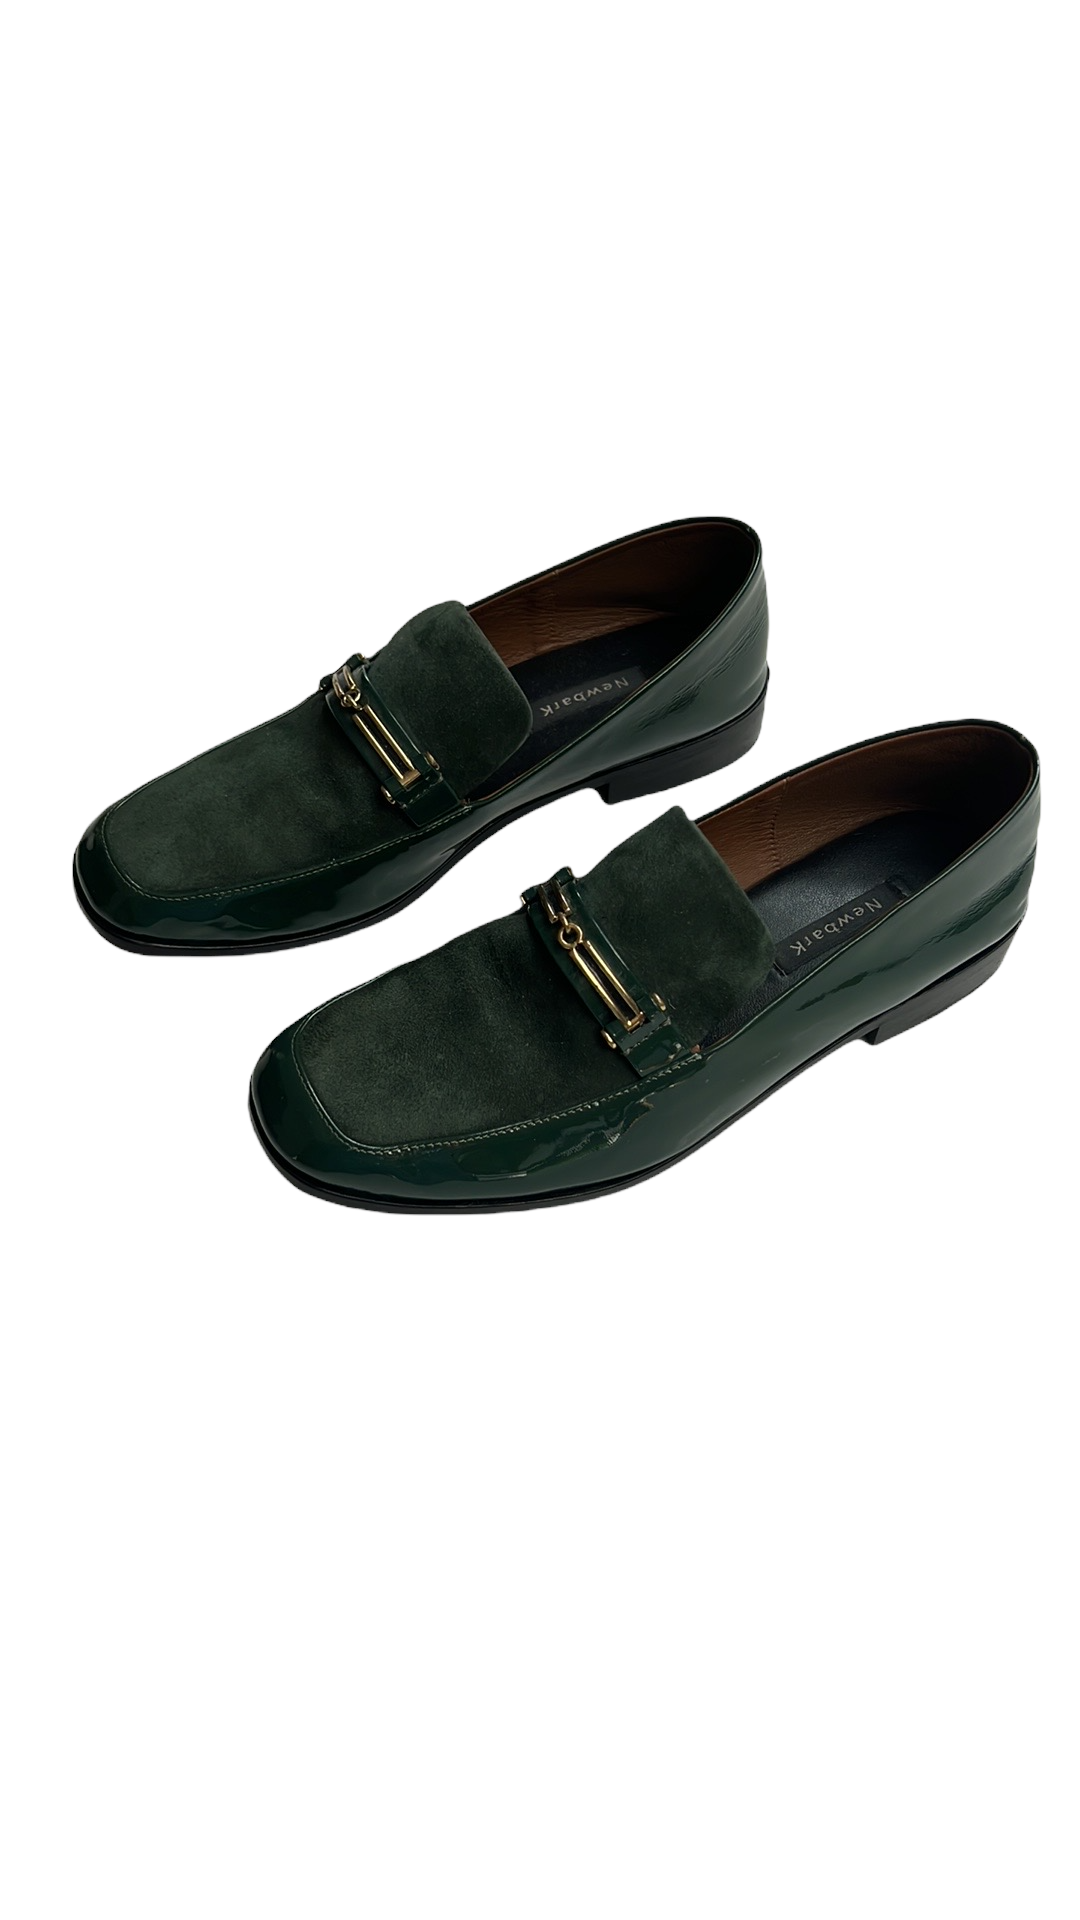 Green Suede and Patent Loafers - 7.5